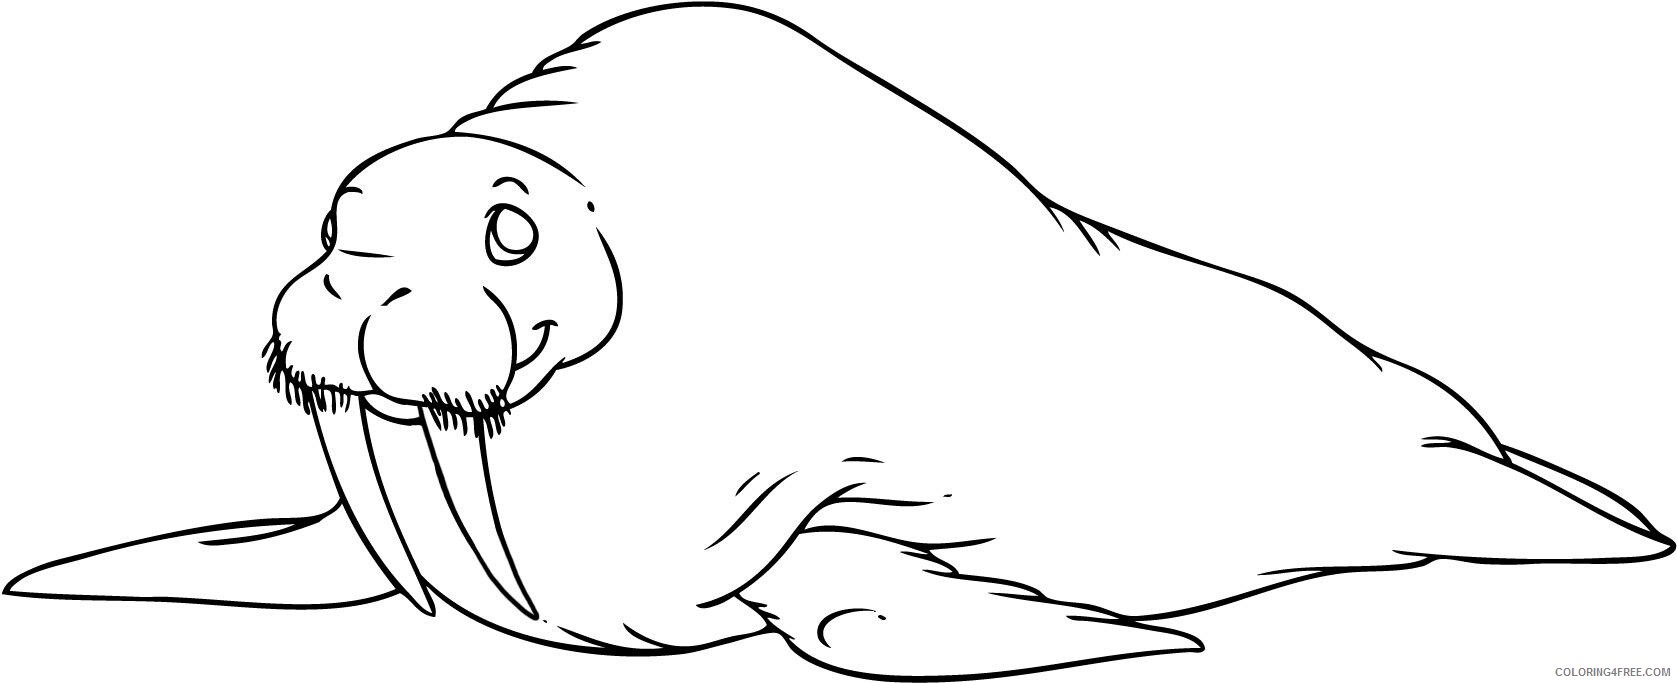 Walrus Coloring Pages Animal Printable Sheets of Walrus 2021 4952 Coloring4free